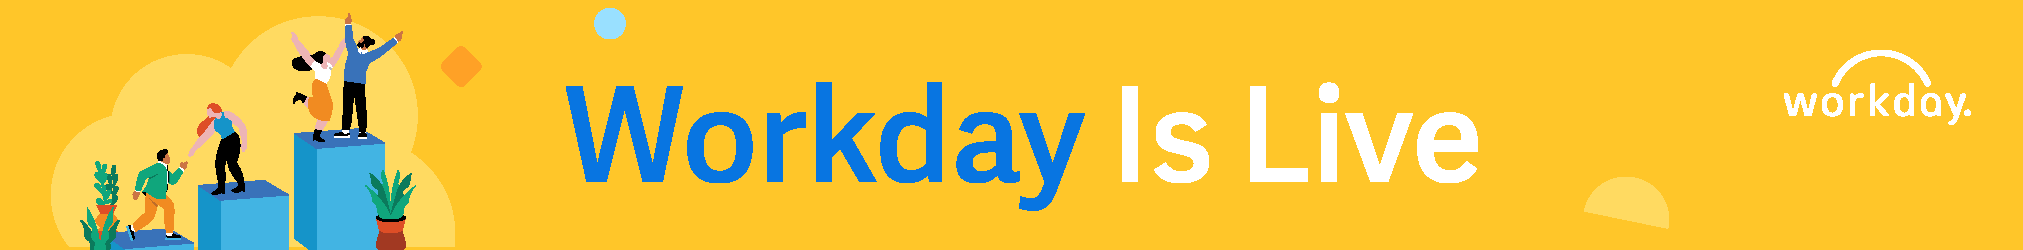 Workday Is Live Web Banner.png